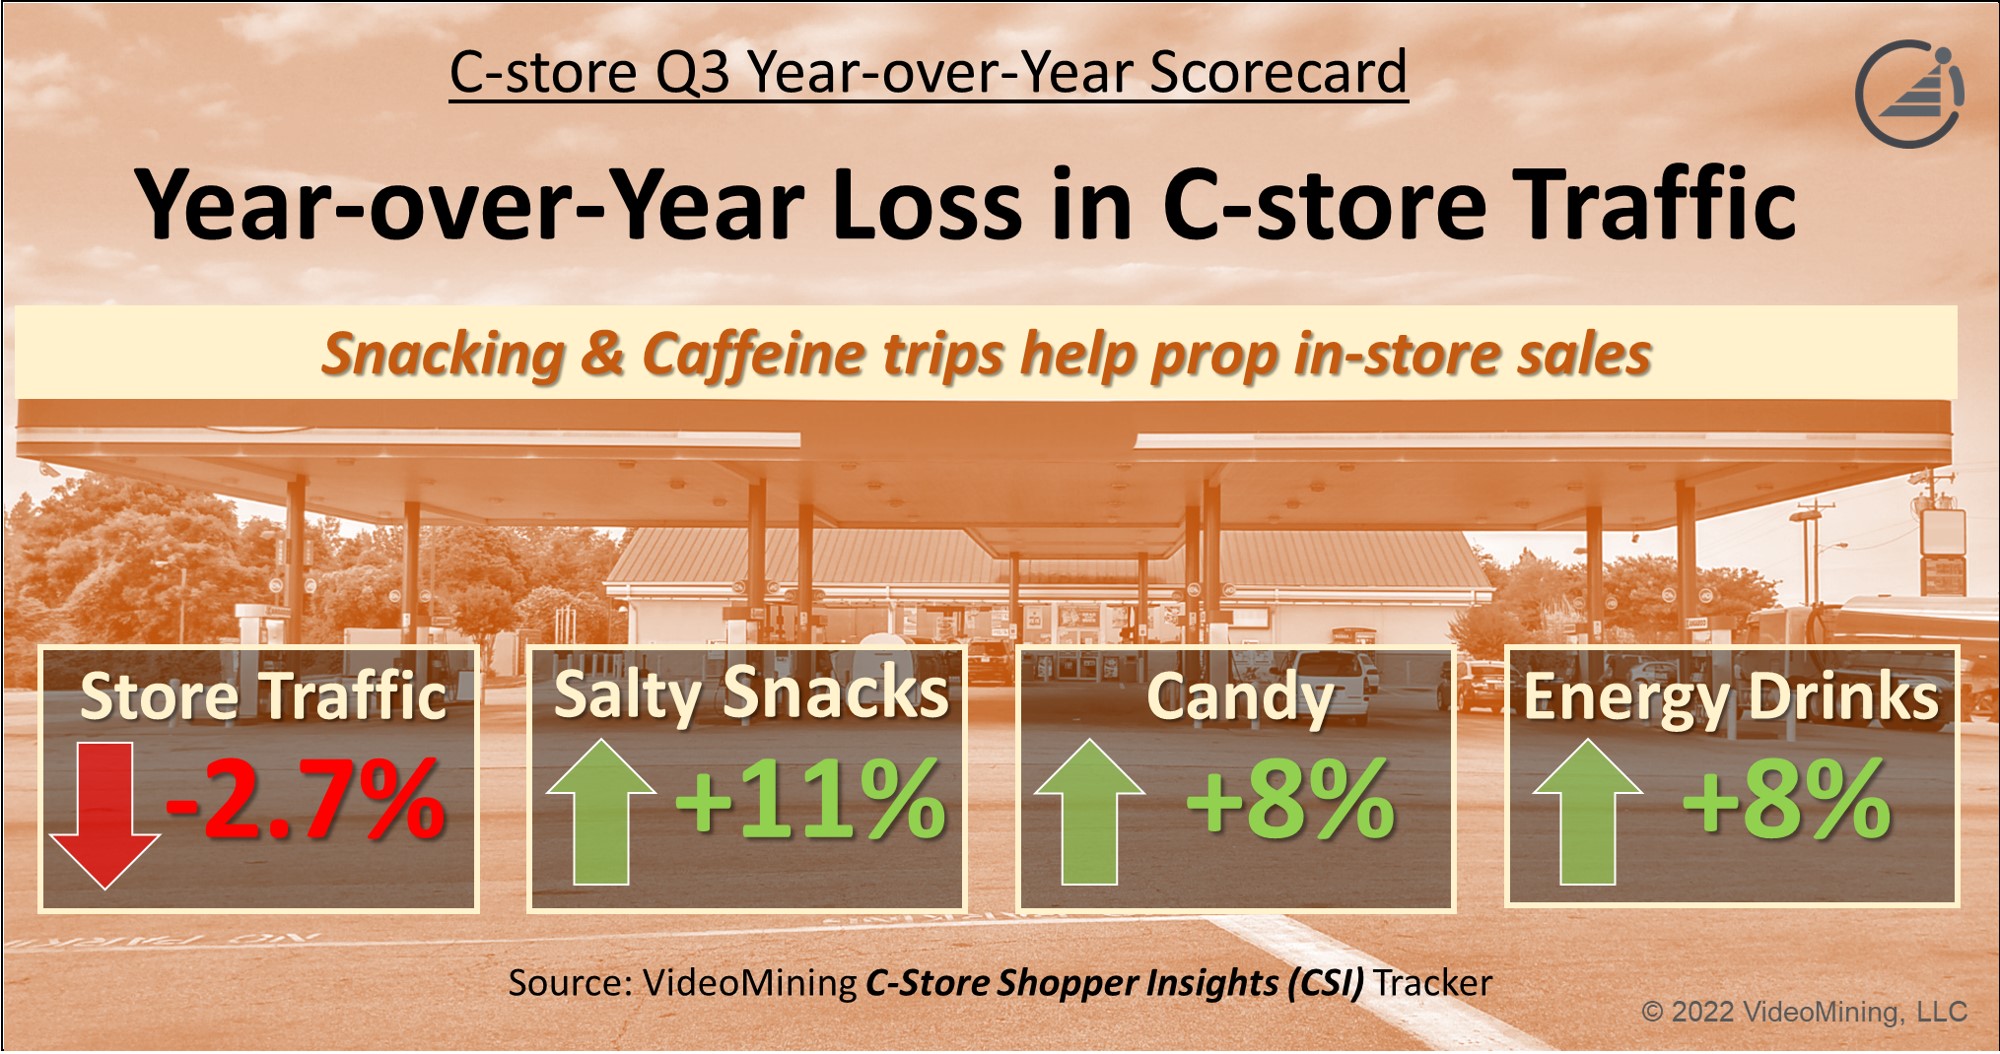 Year-over-Year Loss in C-store Traffic